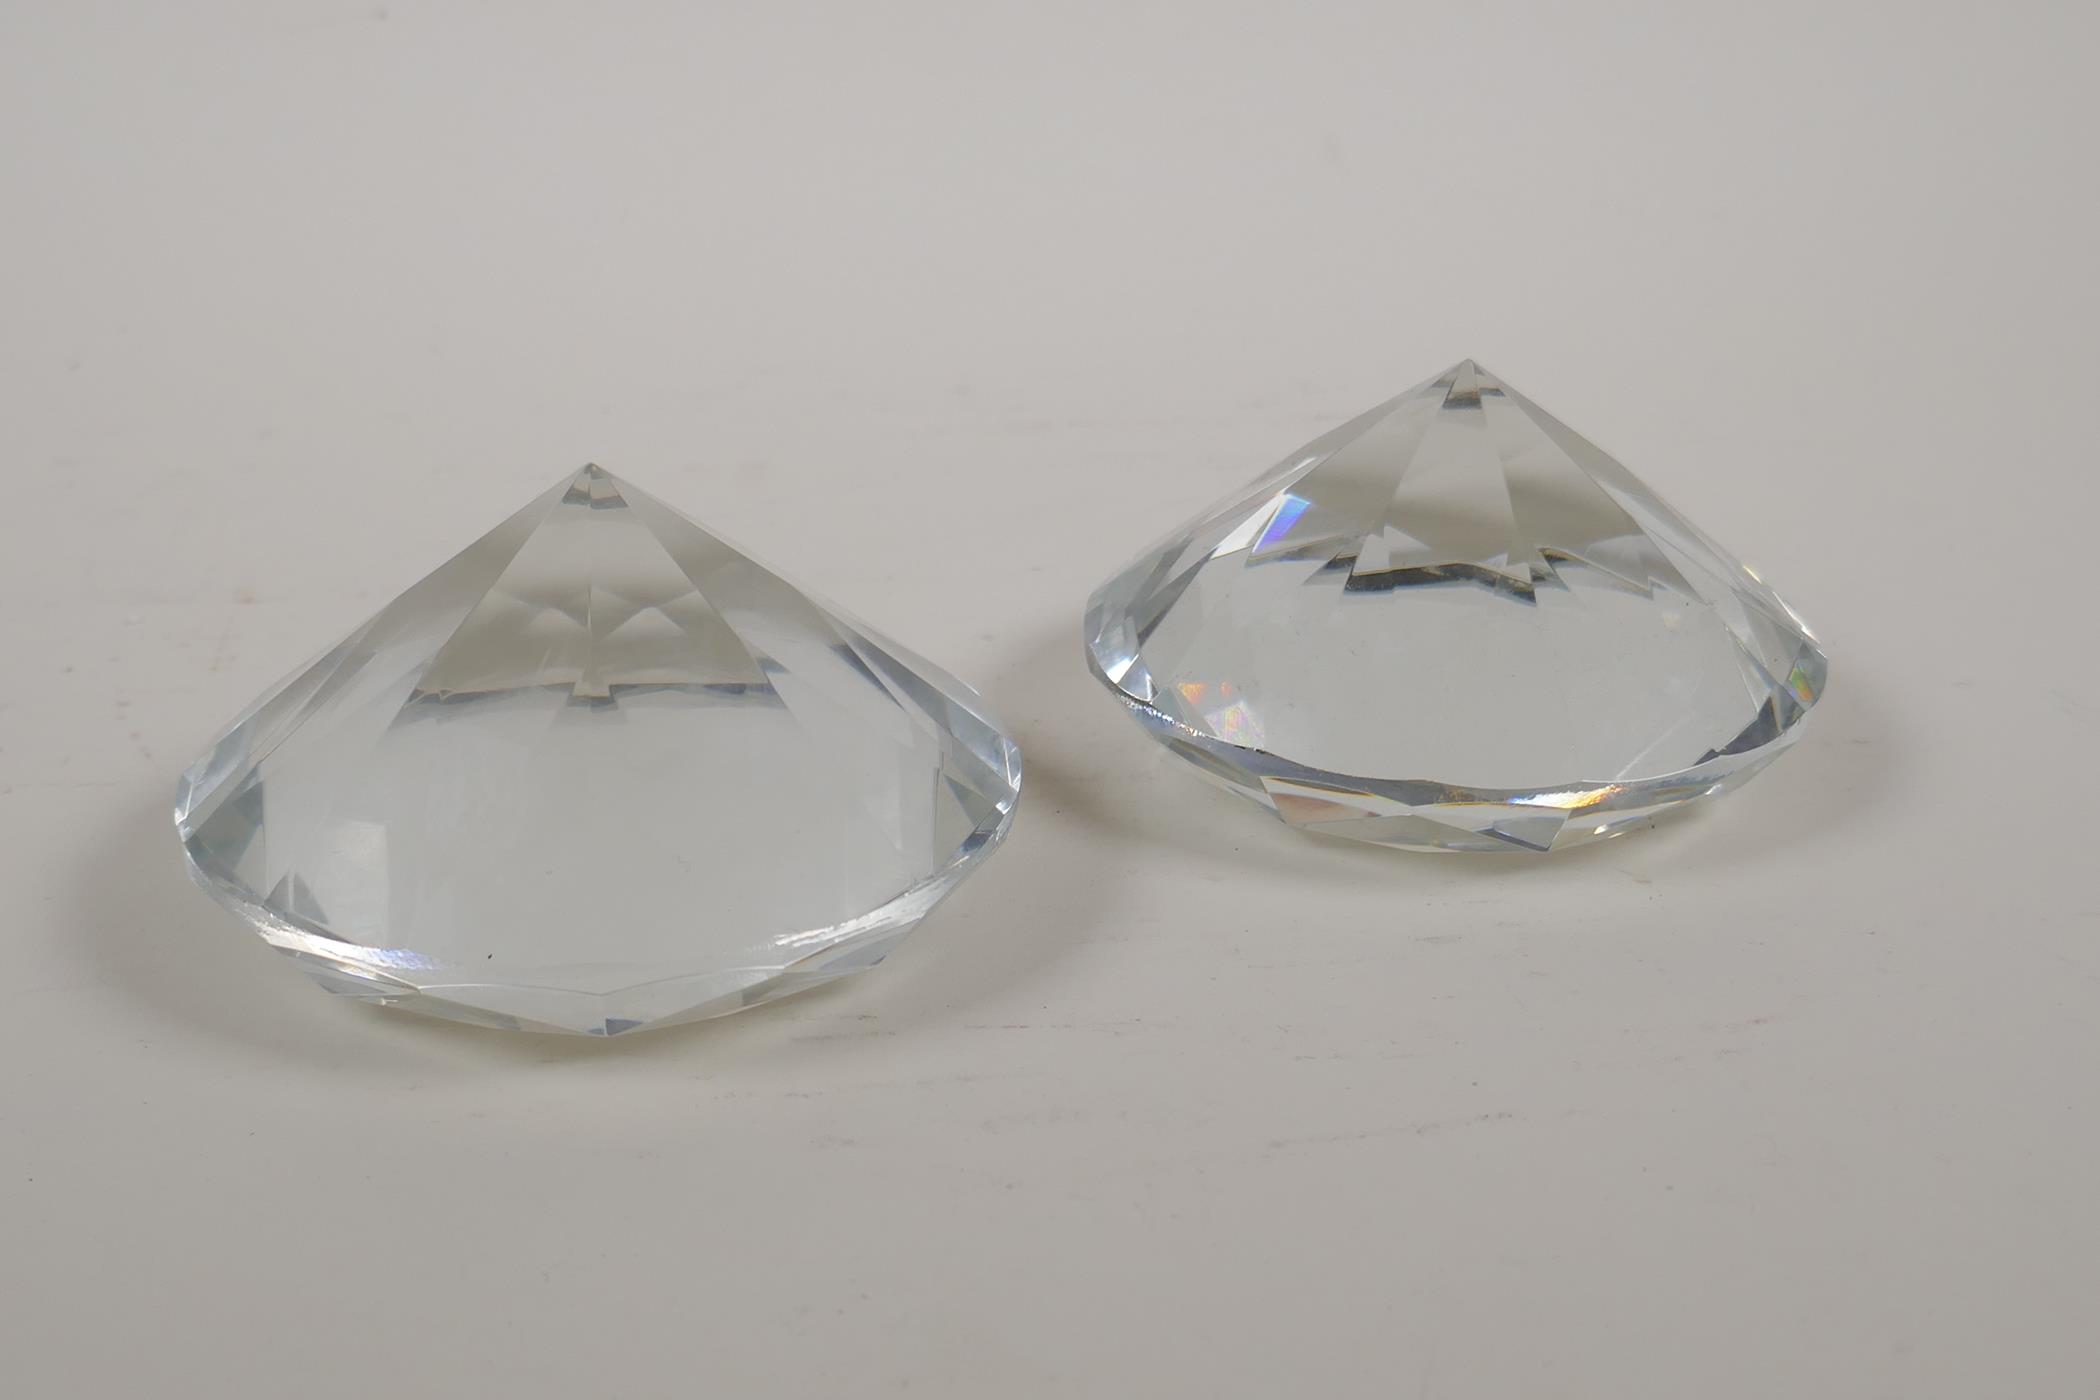 A pair of diamond shaped glass paperweights, 4" diameter - Image 2 of 4